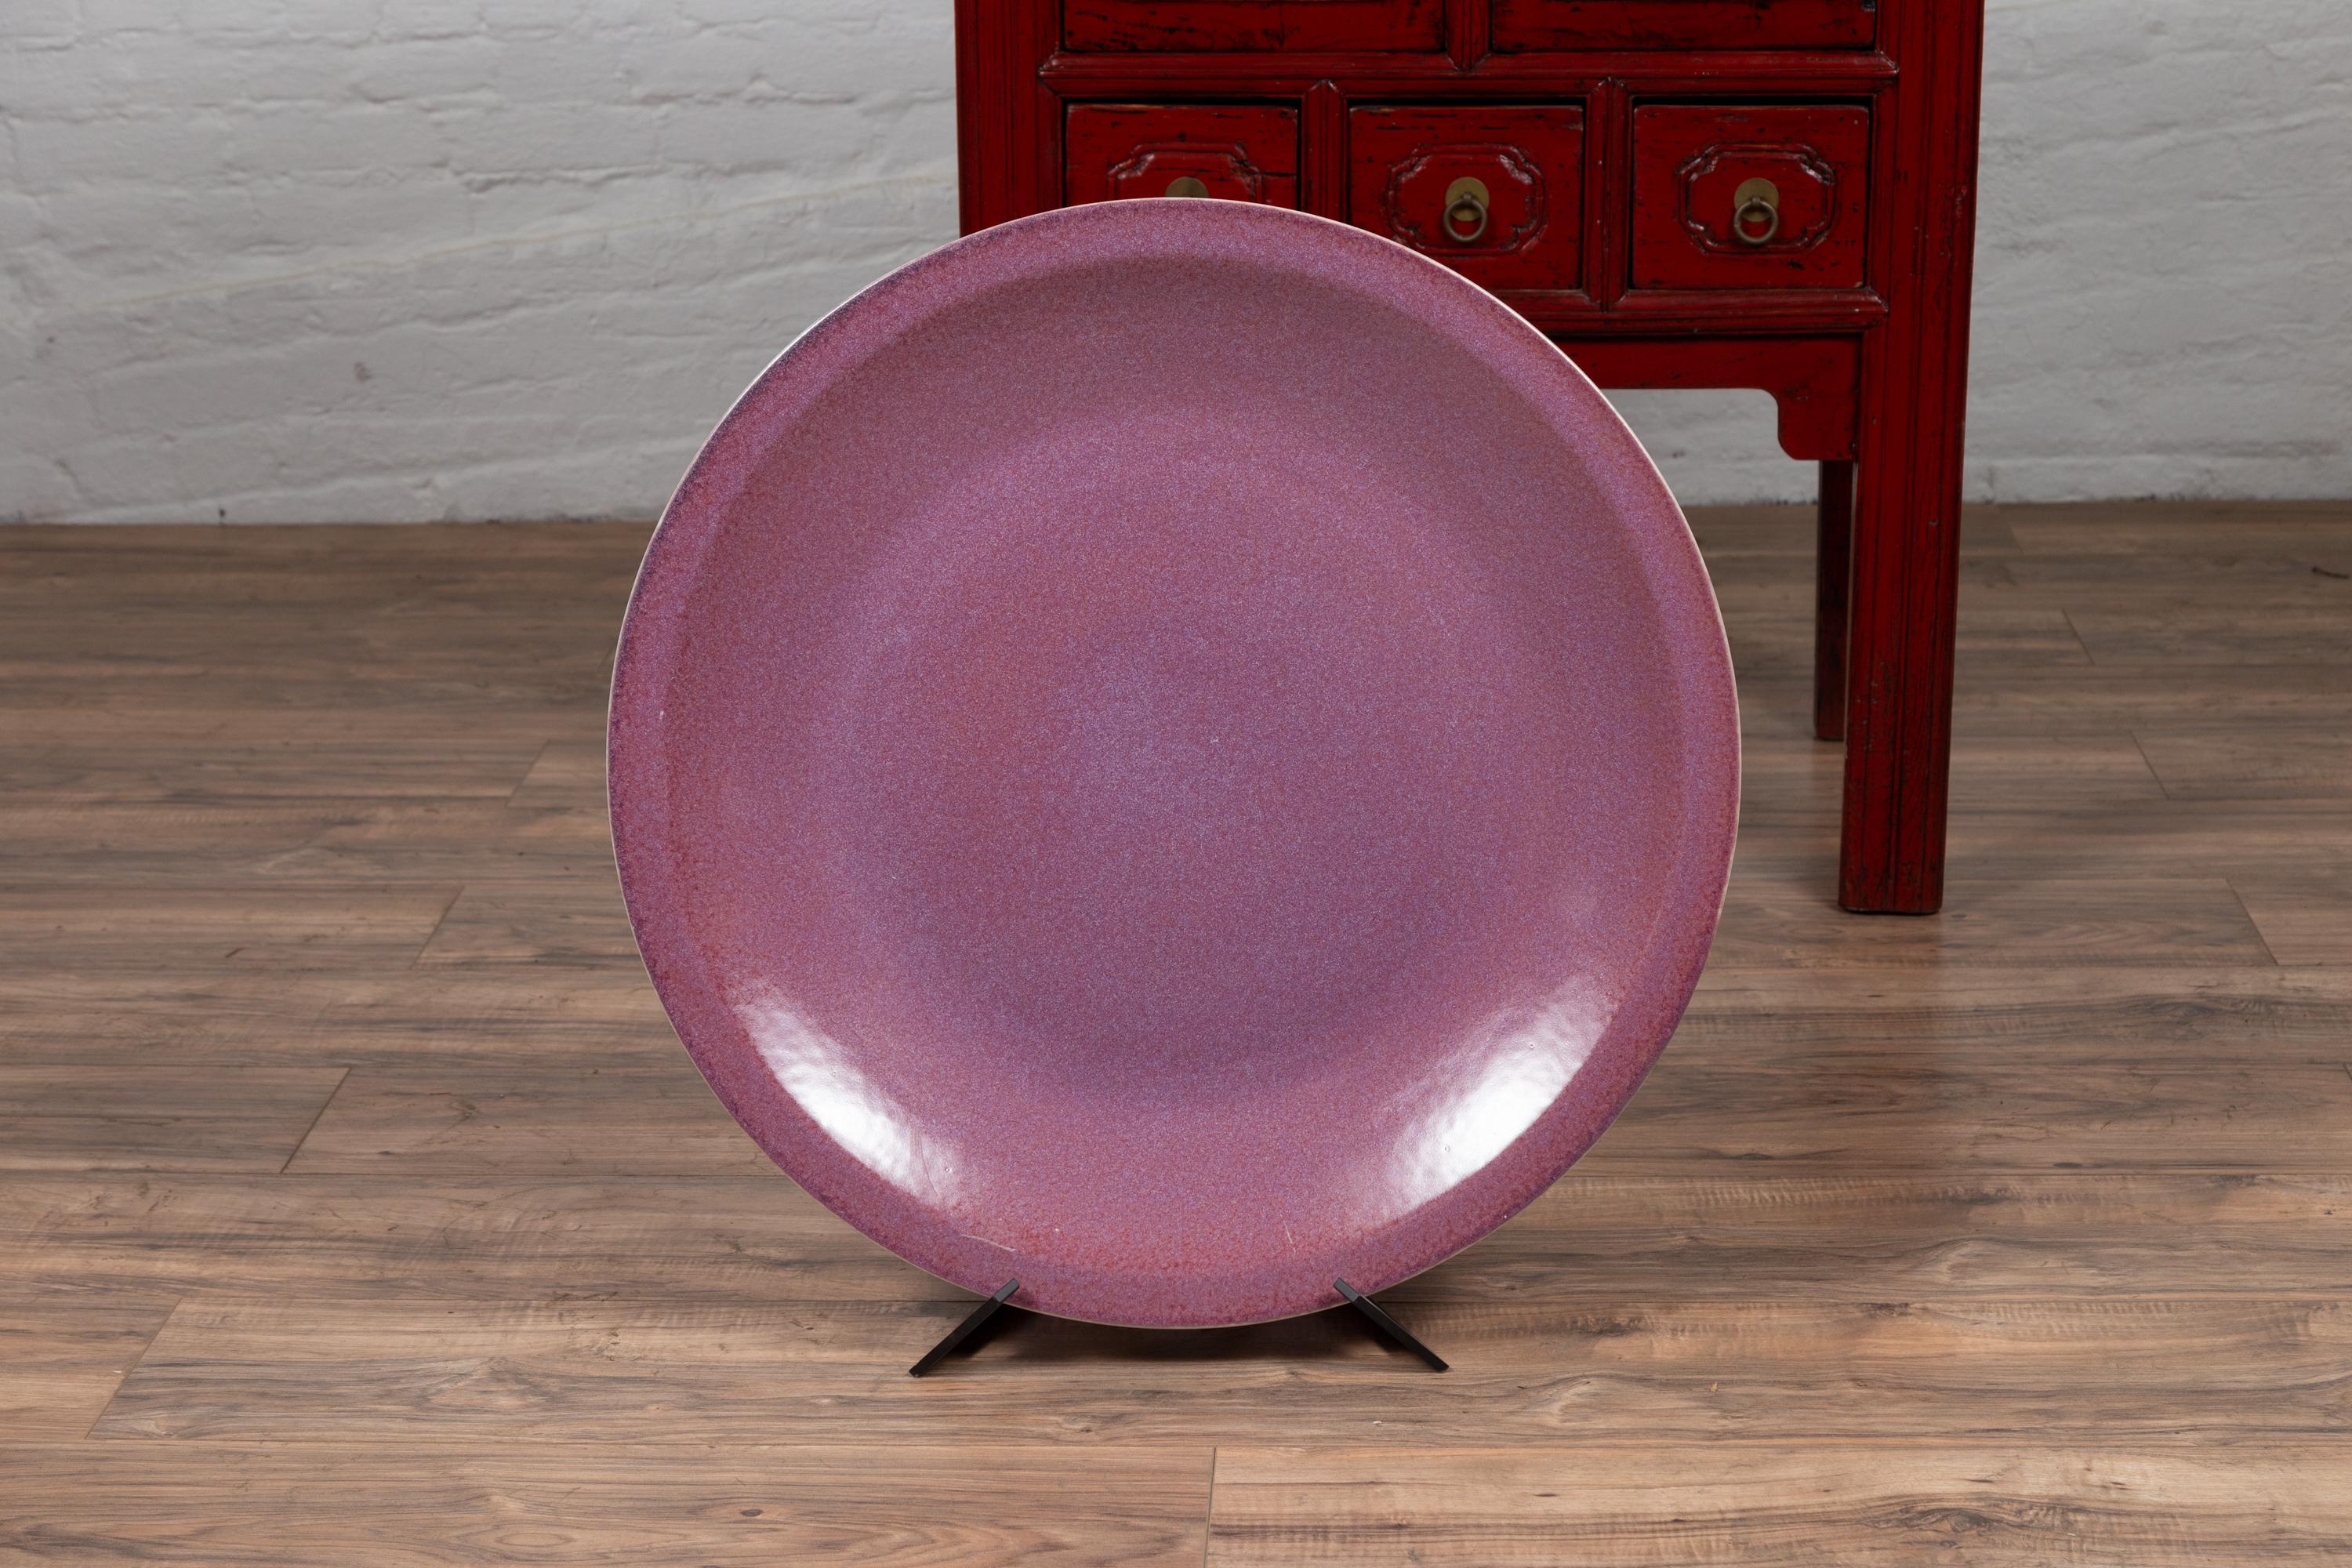 A Chinese vintage purple ceramic charger plate from the second half of the 20th century. We have two charger plates available, priced and sold individually. Born in China during the 1980s, this elegant charger plate features a lovely purple color